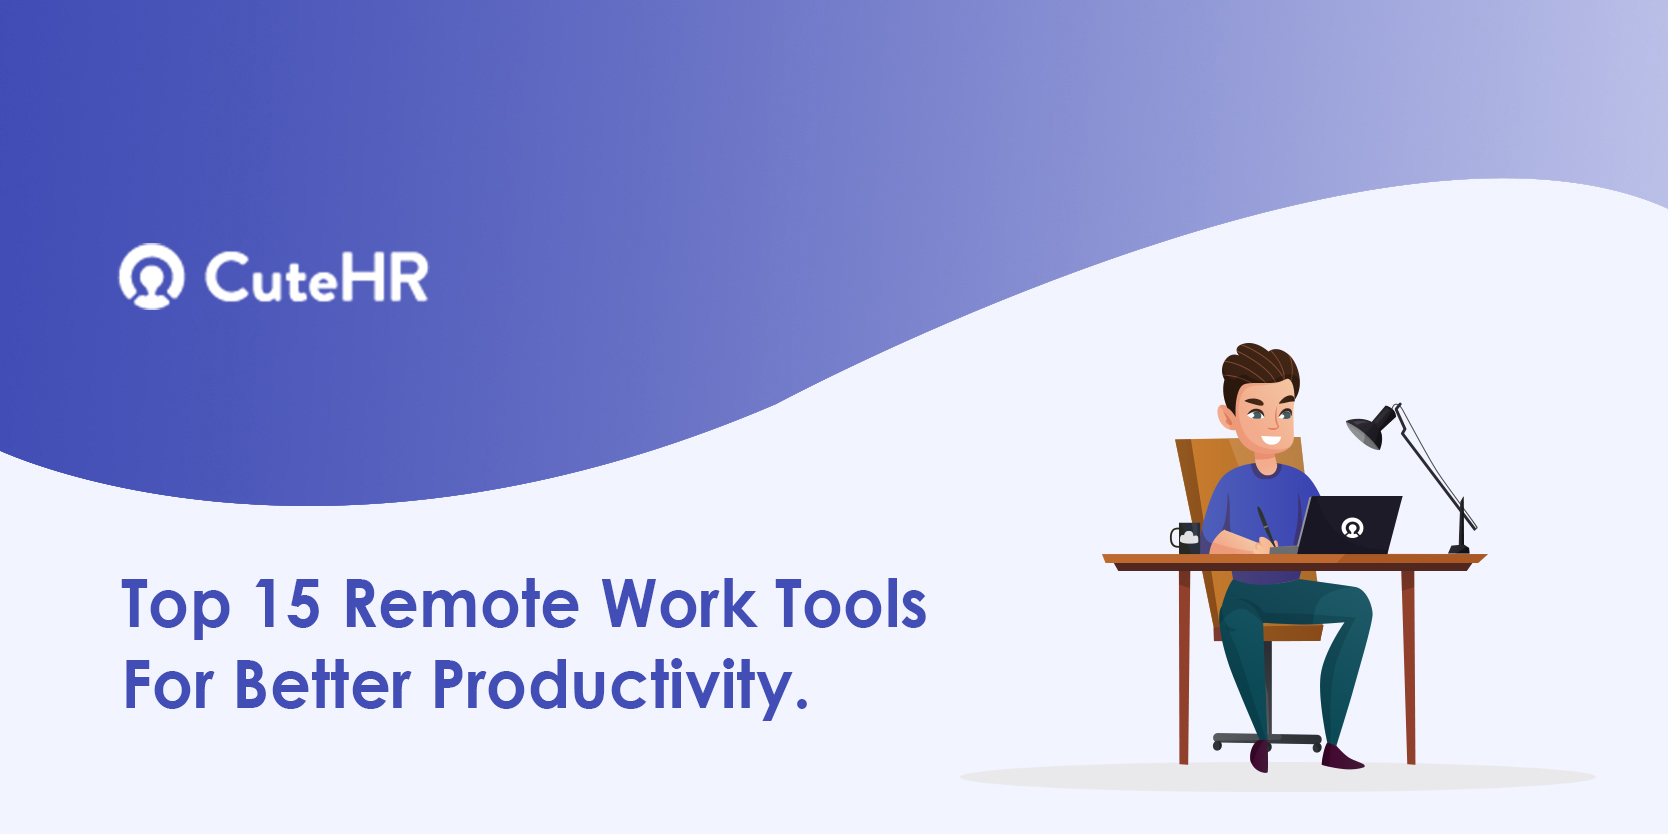 Top 15 Remote Work Tools For Better Productivity